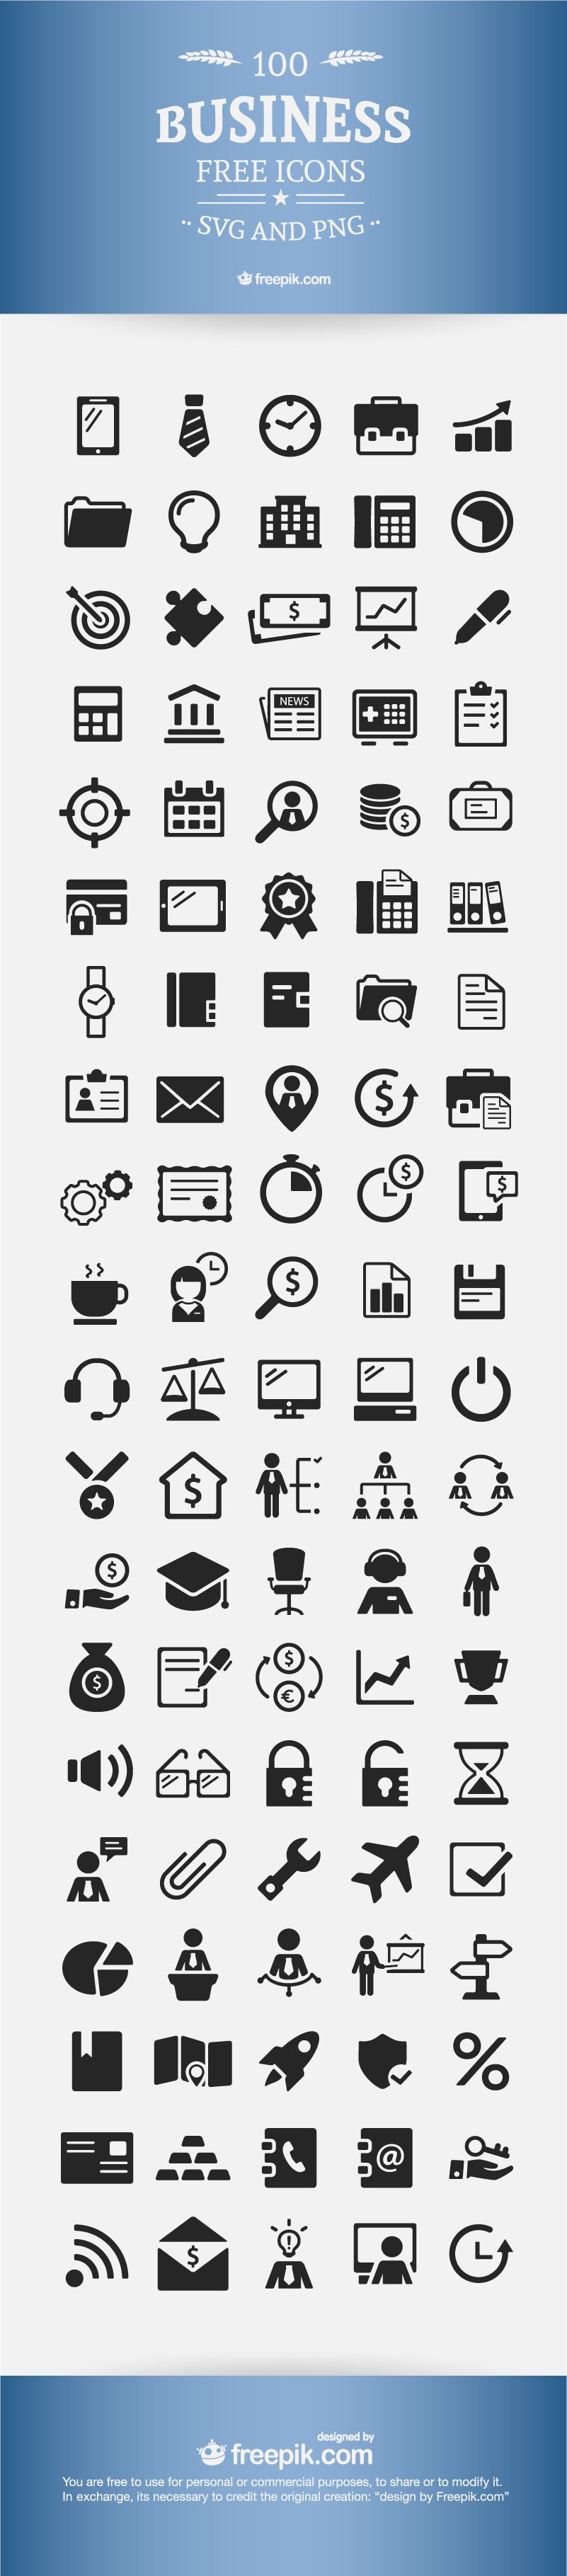 download free business icons 100 vectors pinterest 100 free